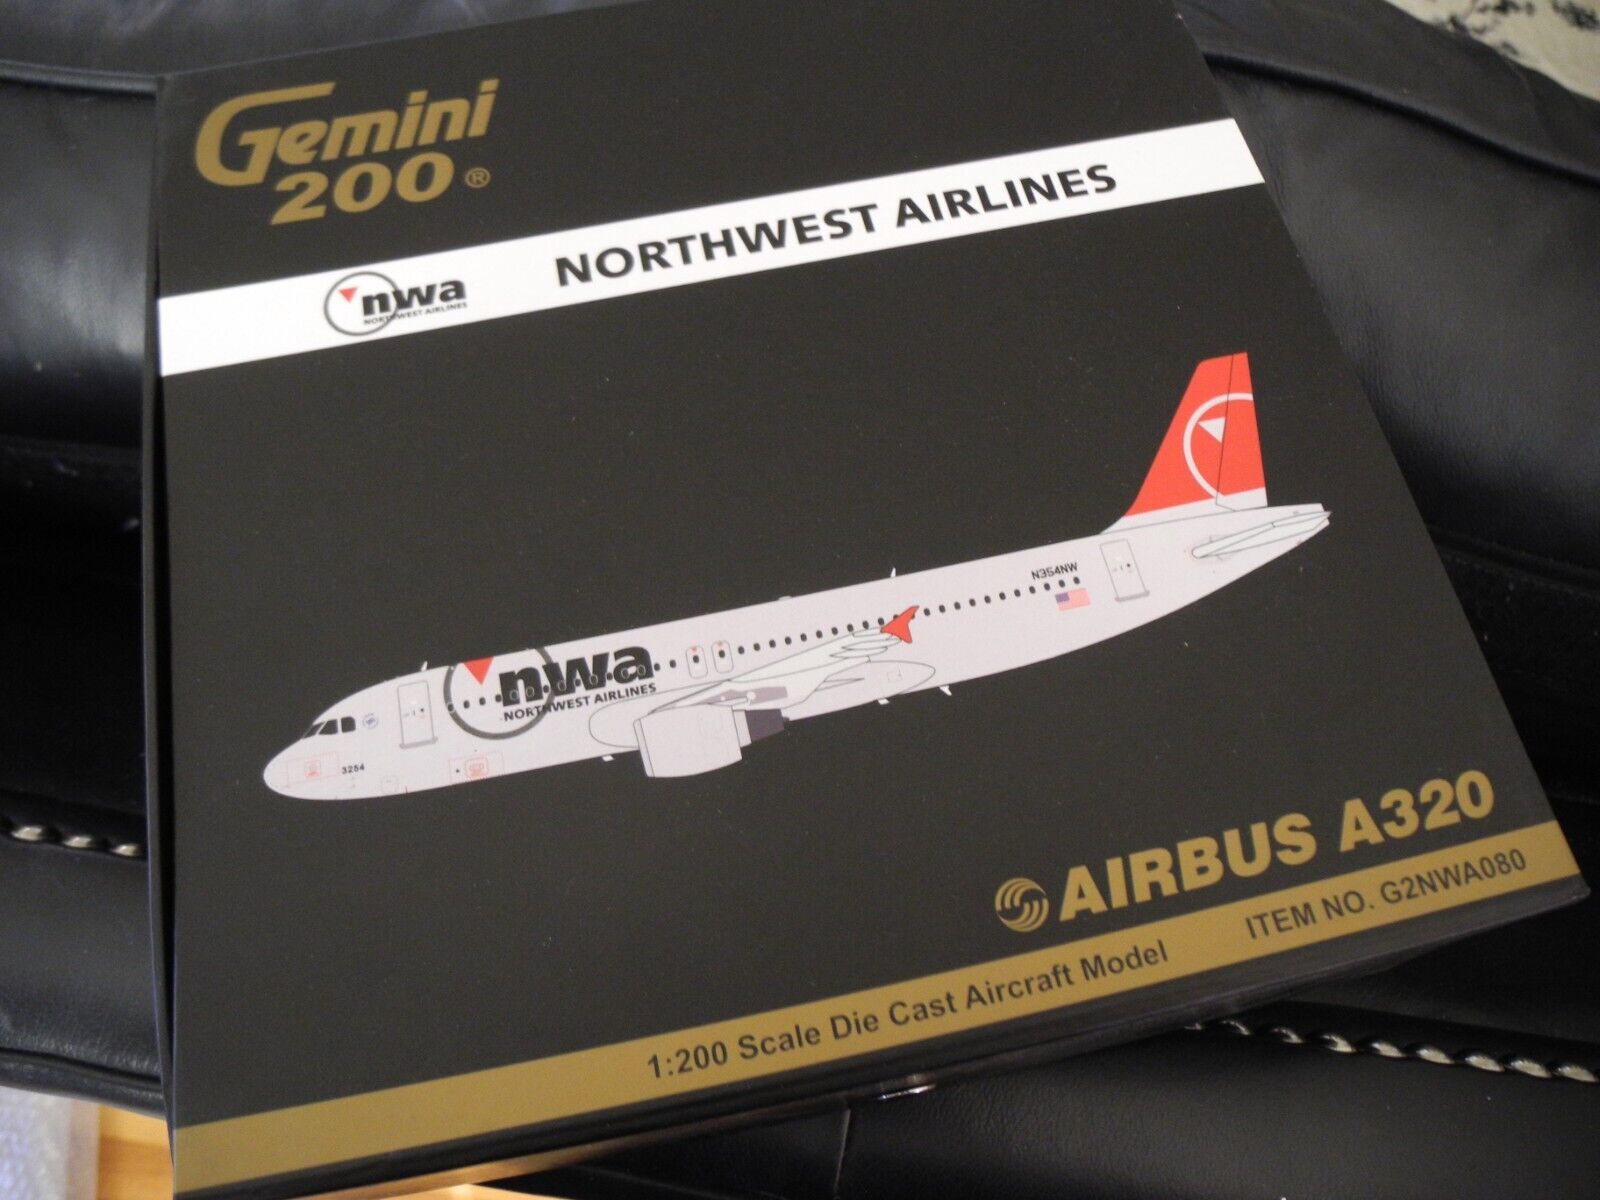 Extremely RARE Gemini Jets AIRBUS A320 Northwest Airlines, Retired, 1:200